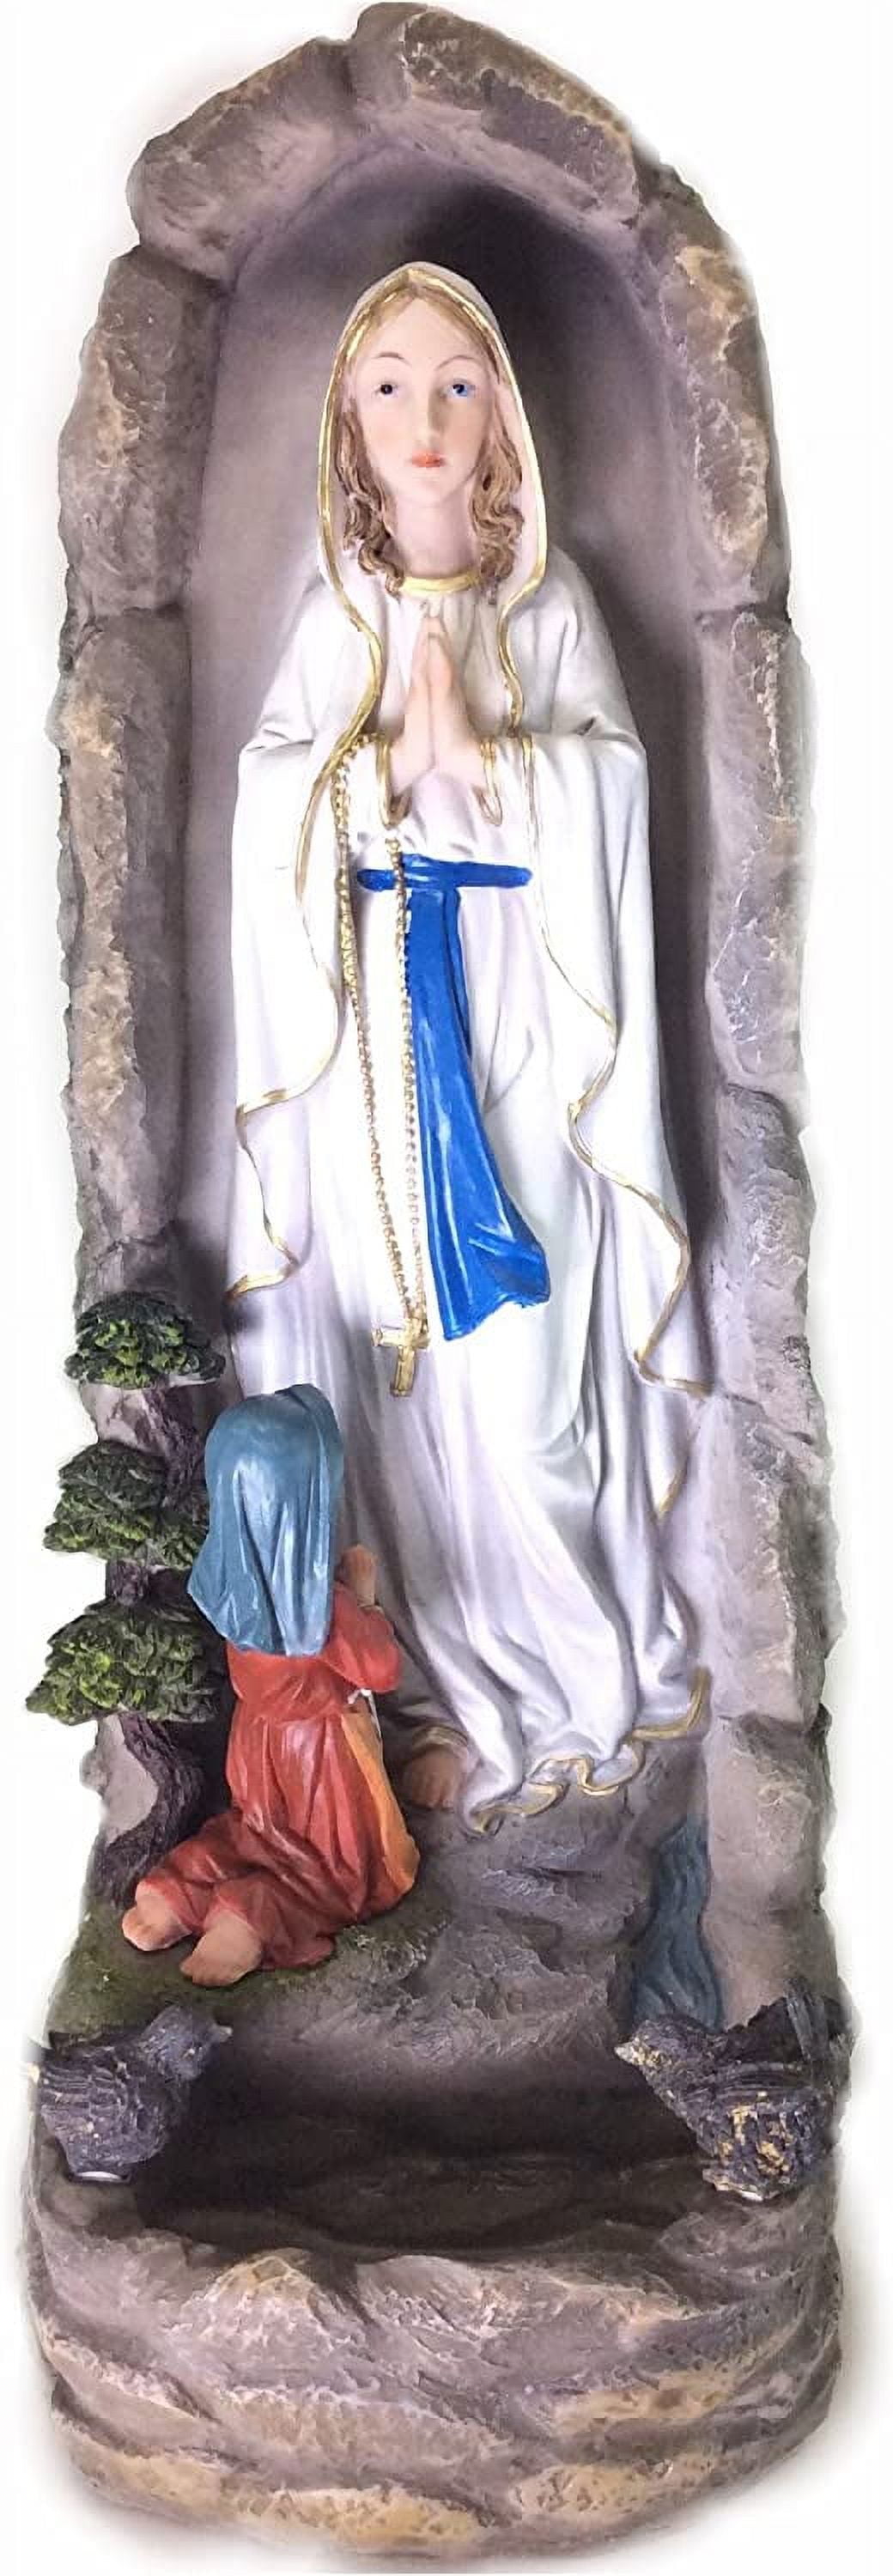 Our Lady Of Lourdes Hand Painted Resin Outdoor Garden Statue Water ...